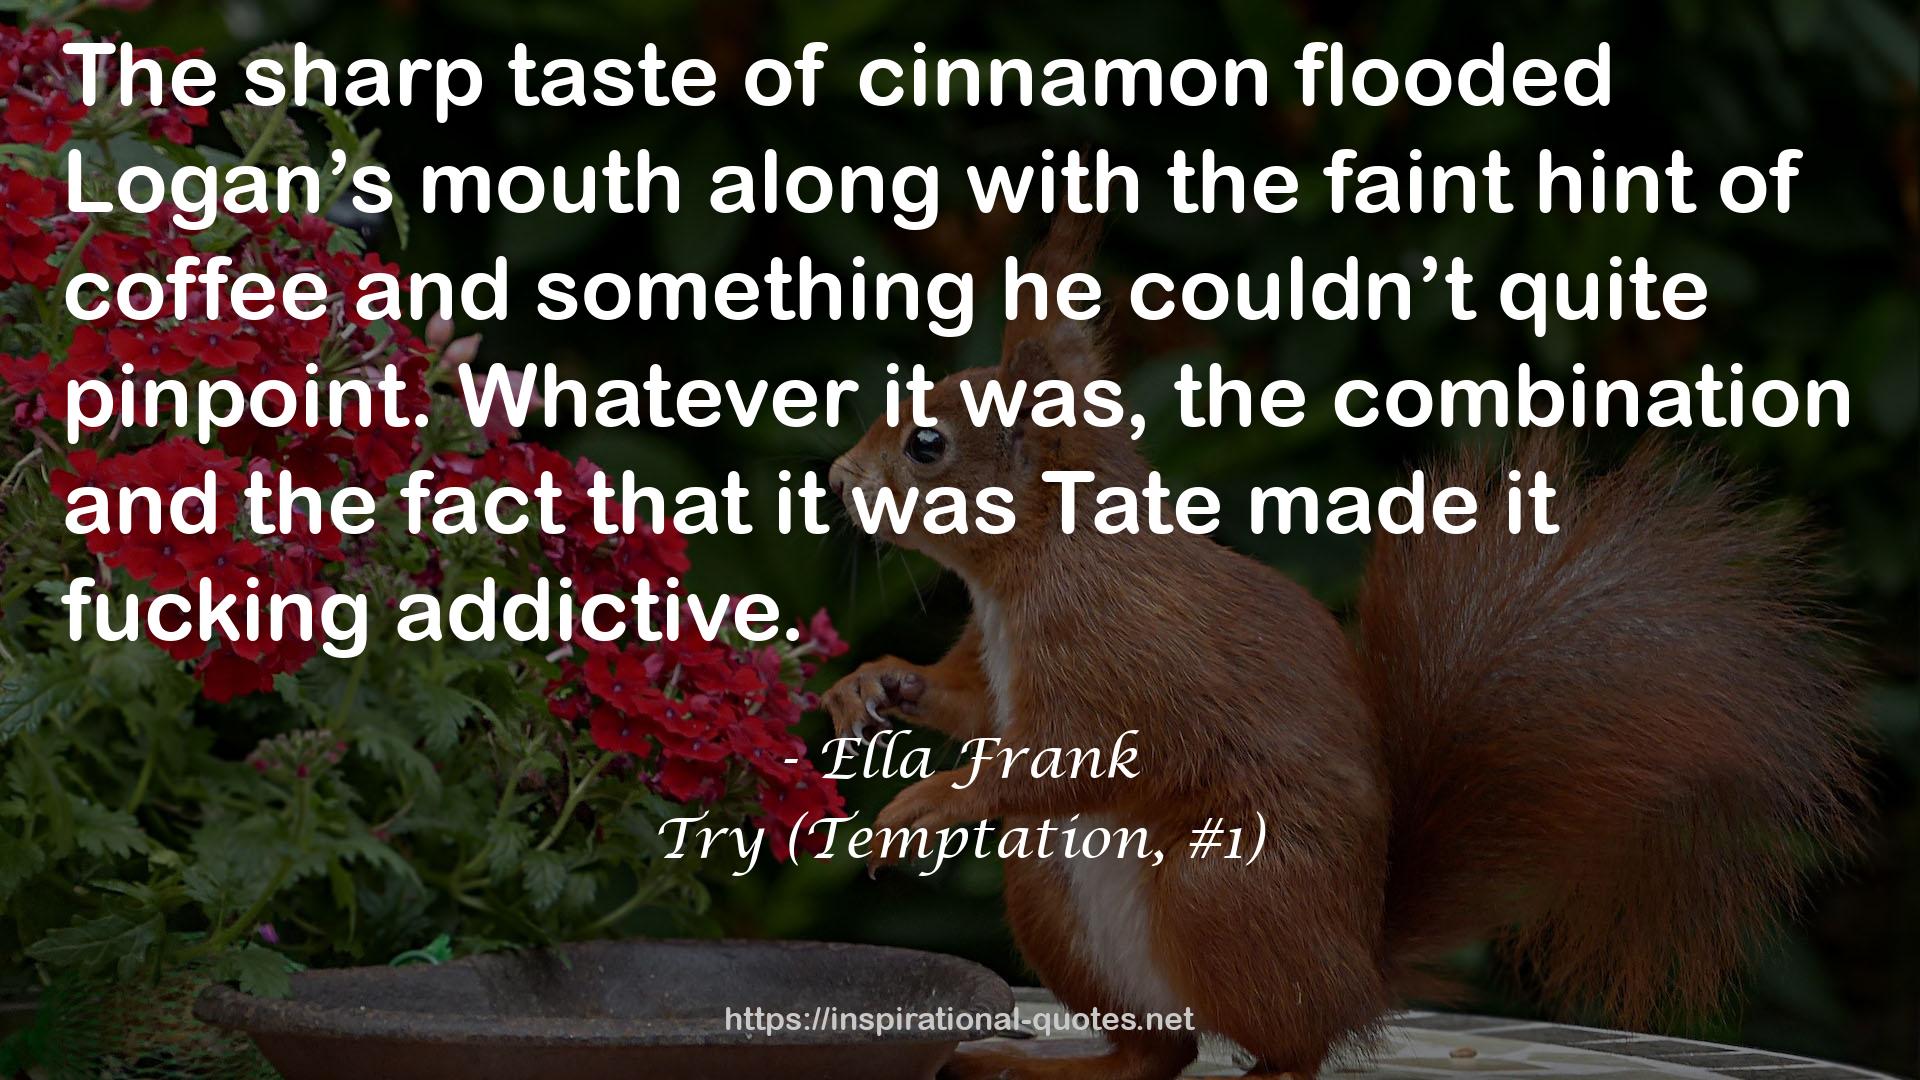 Try (Temptation, #1) QUOTES